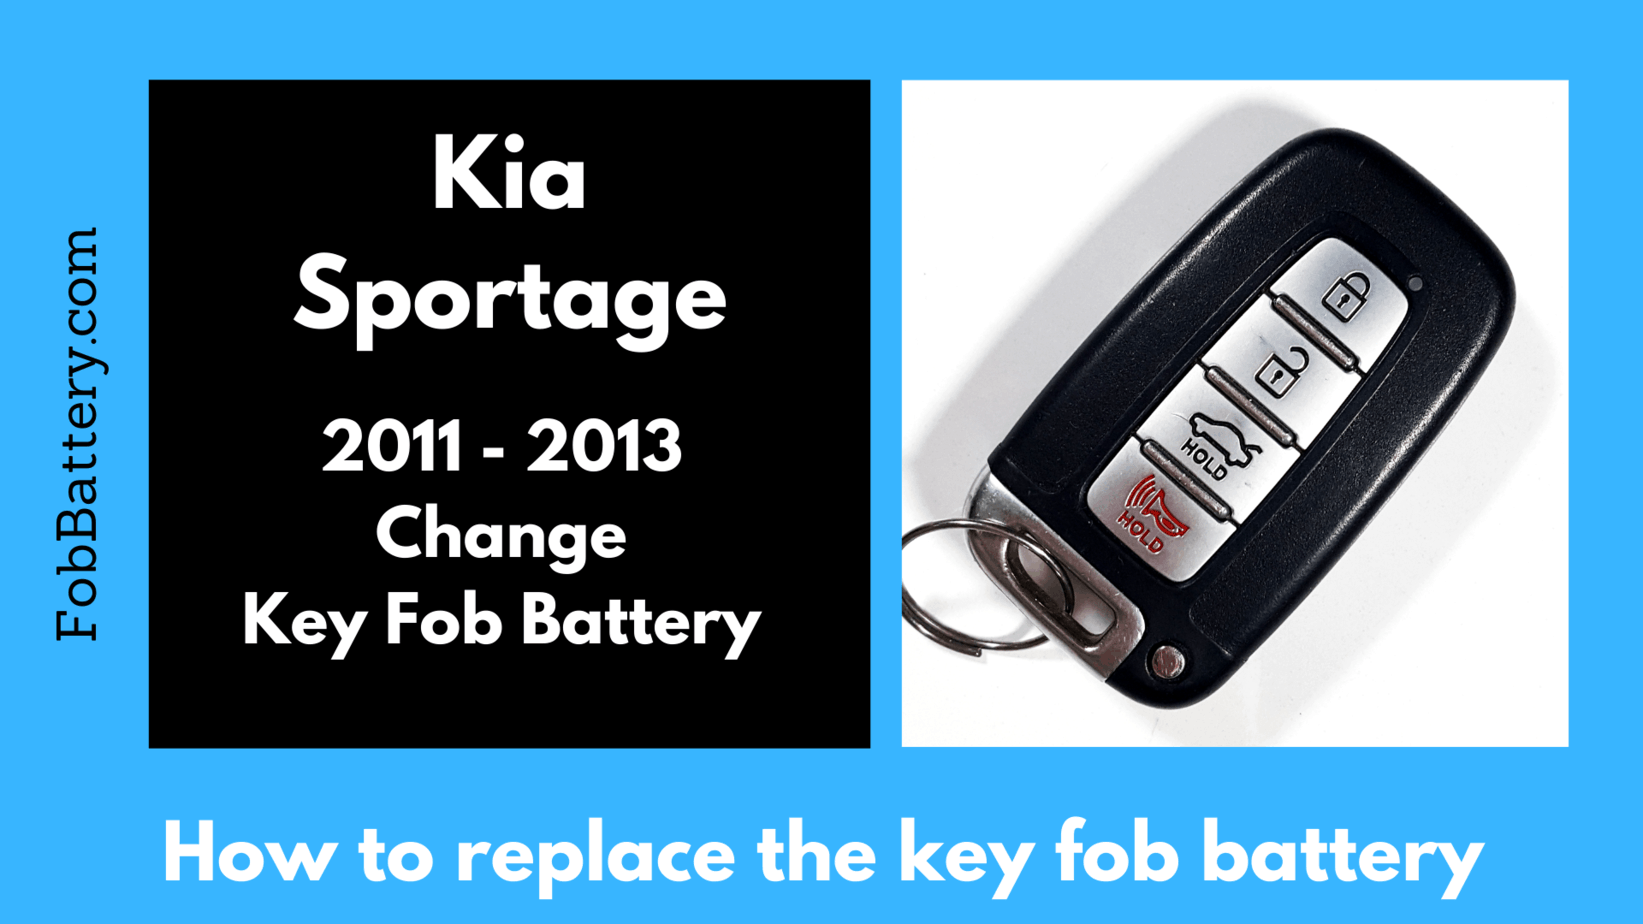 Kia key fob battery replacement guide